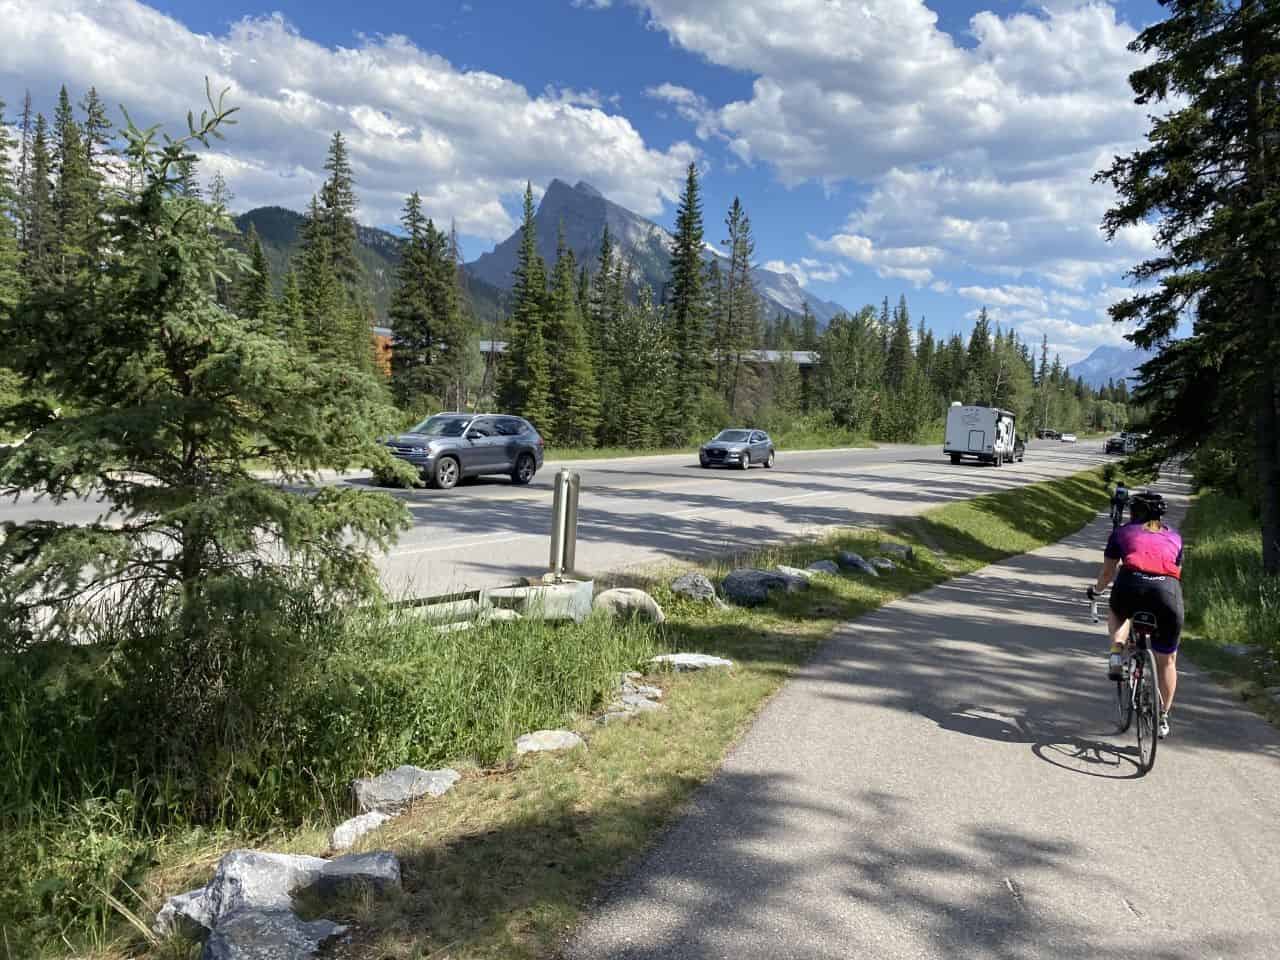 The Banff Legacy Trail connects the Bow Valley Parkway, Banff and Canmore with a popular multi-use trail. The Legacy Trail encourages locals and visitors alike to explore the Bow Valley in an environmentally friendly way.